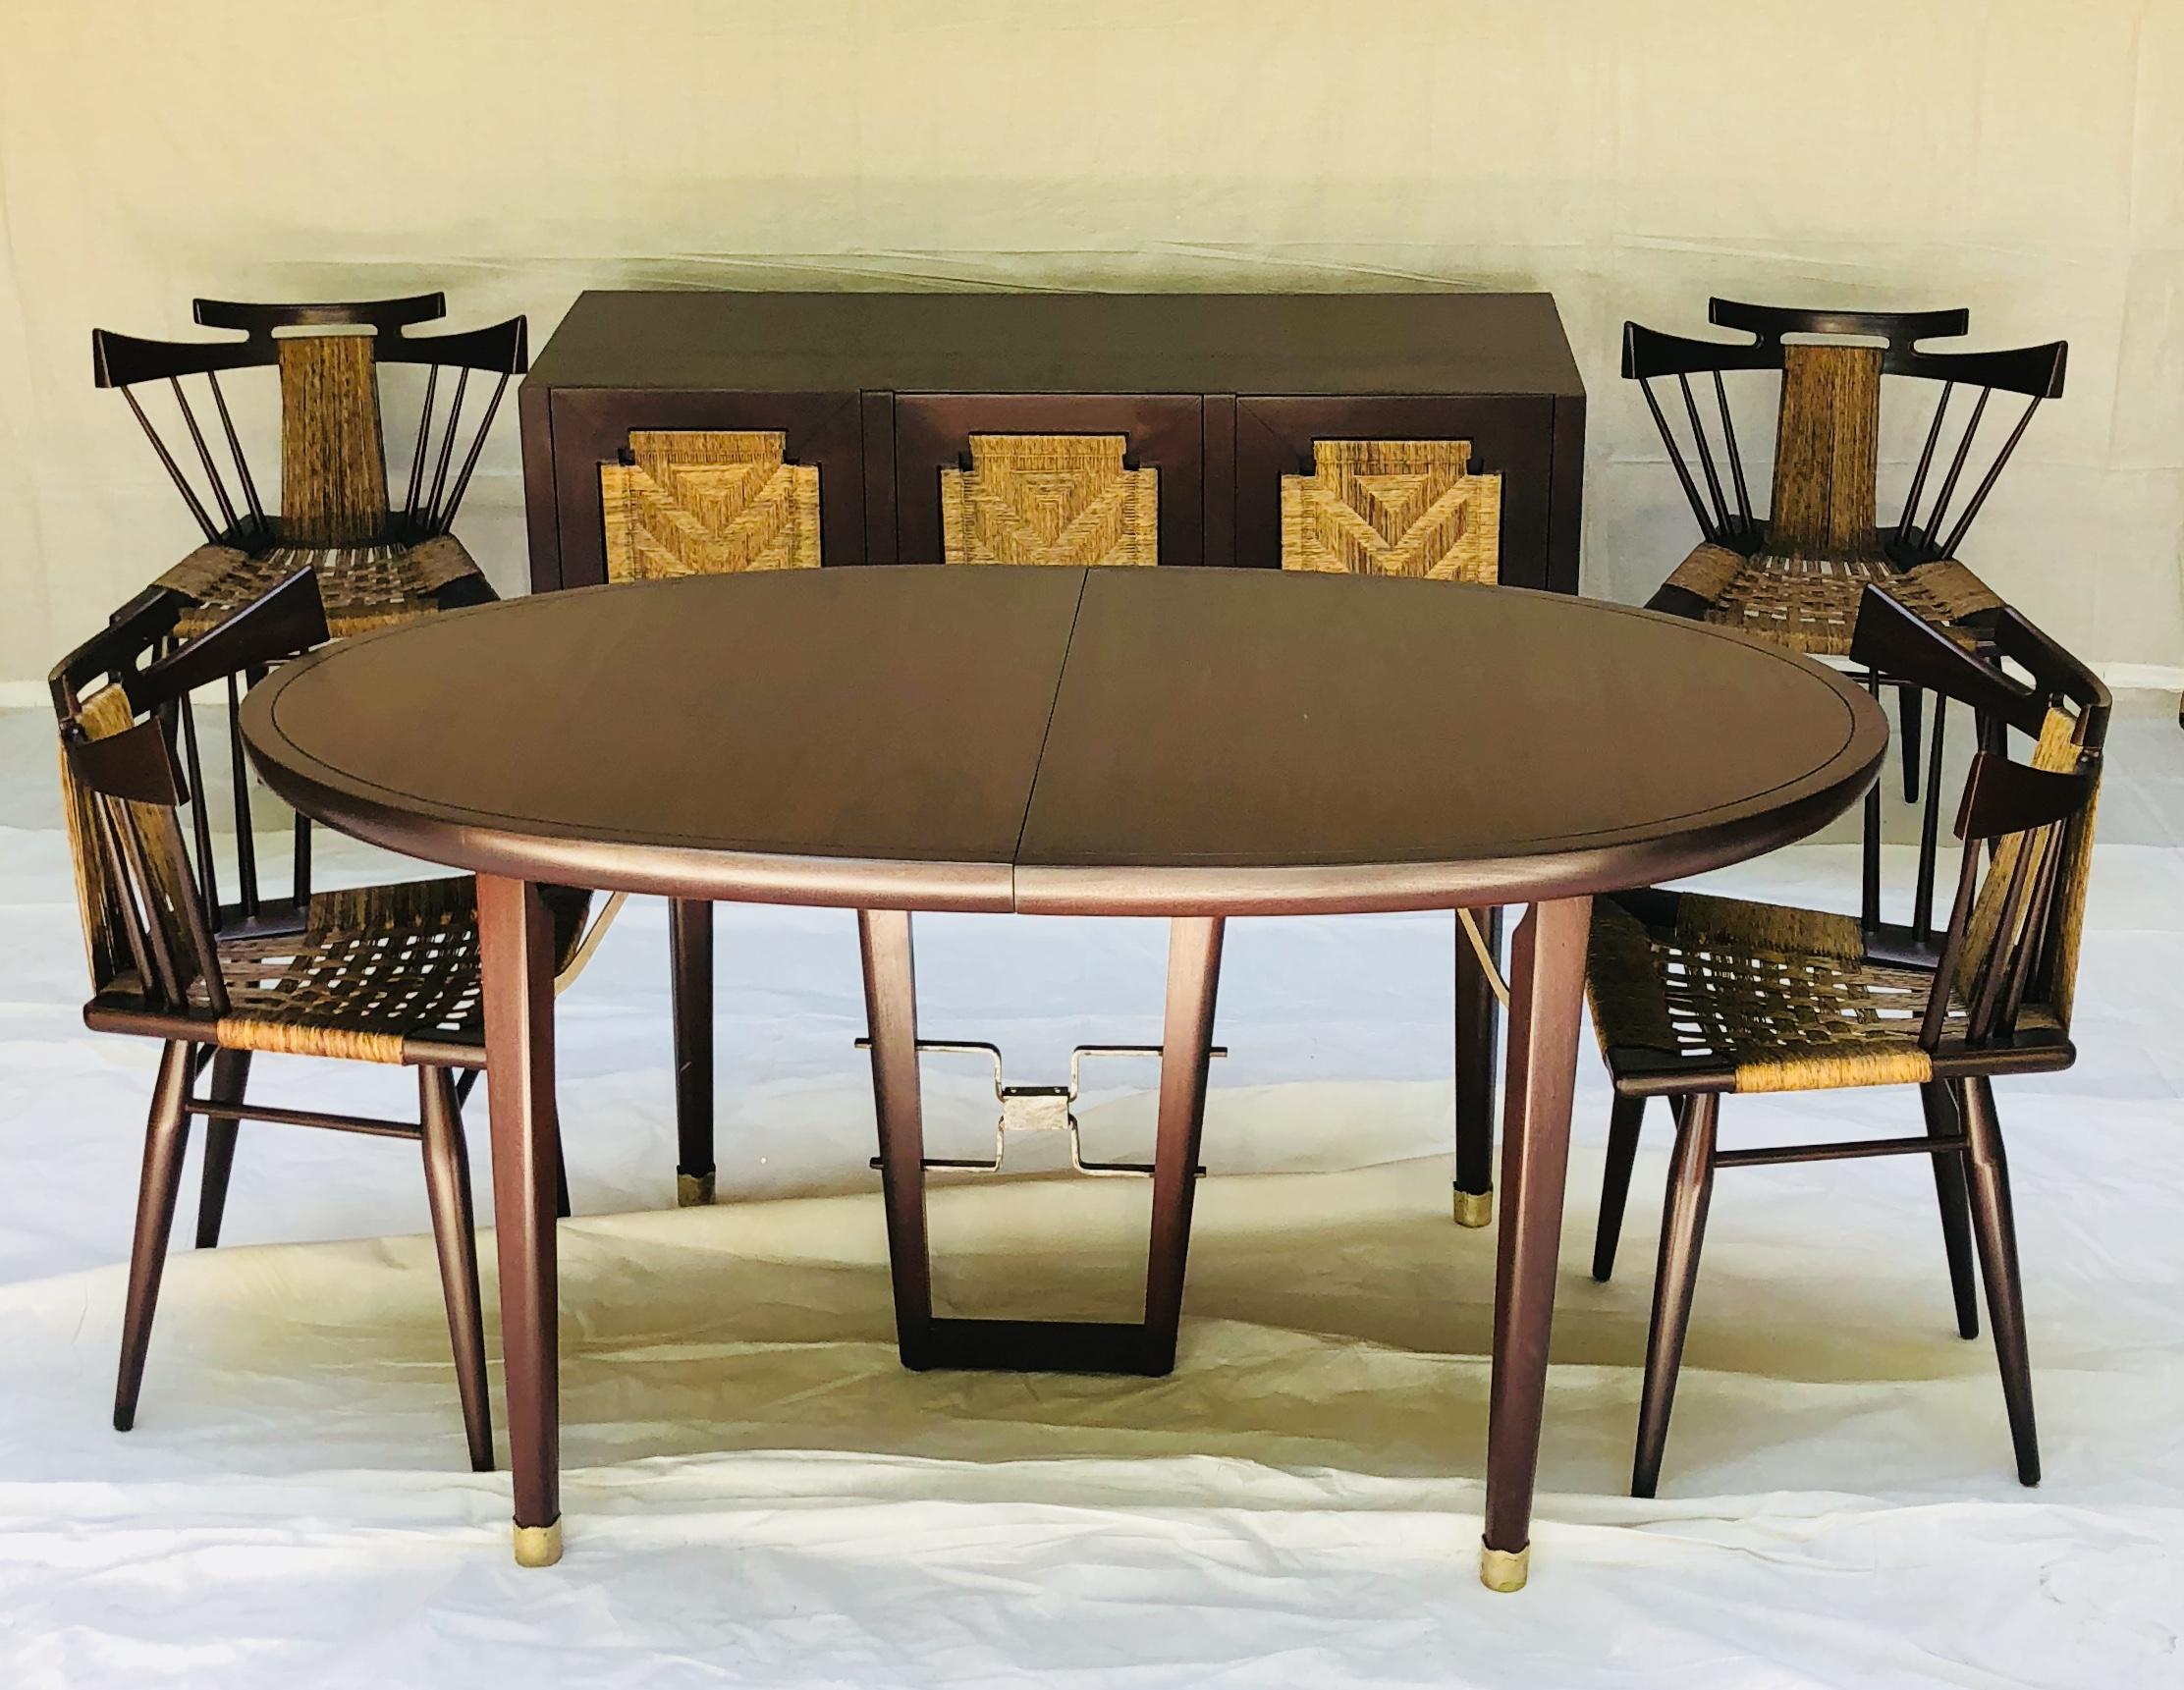 Edmond Spence Mahogany Dining Table Designed for Industria Mueblera, circa 1958 For Sale 3